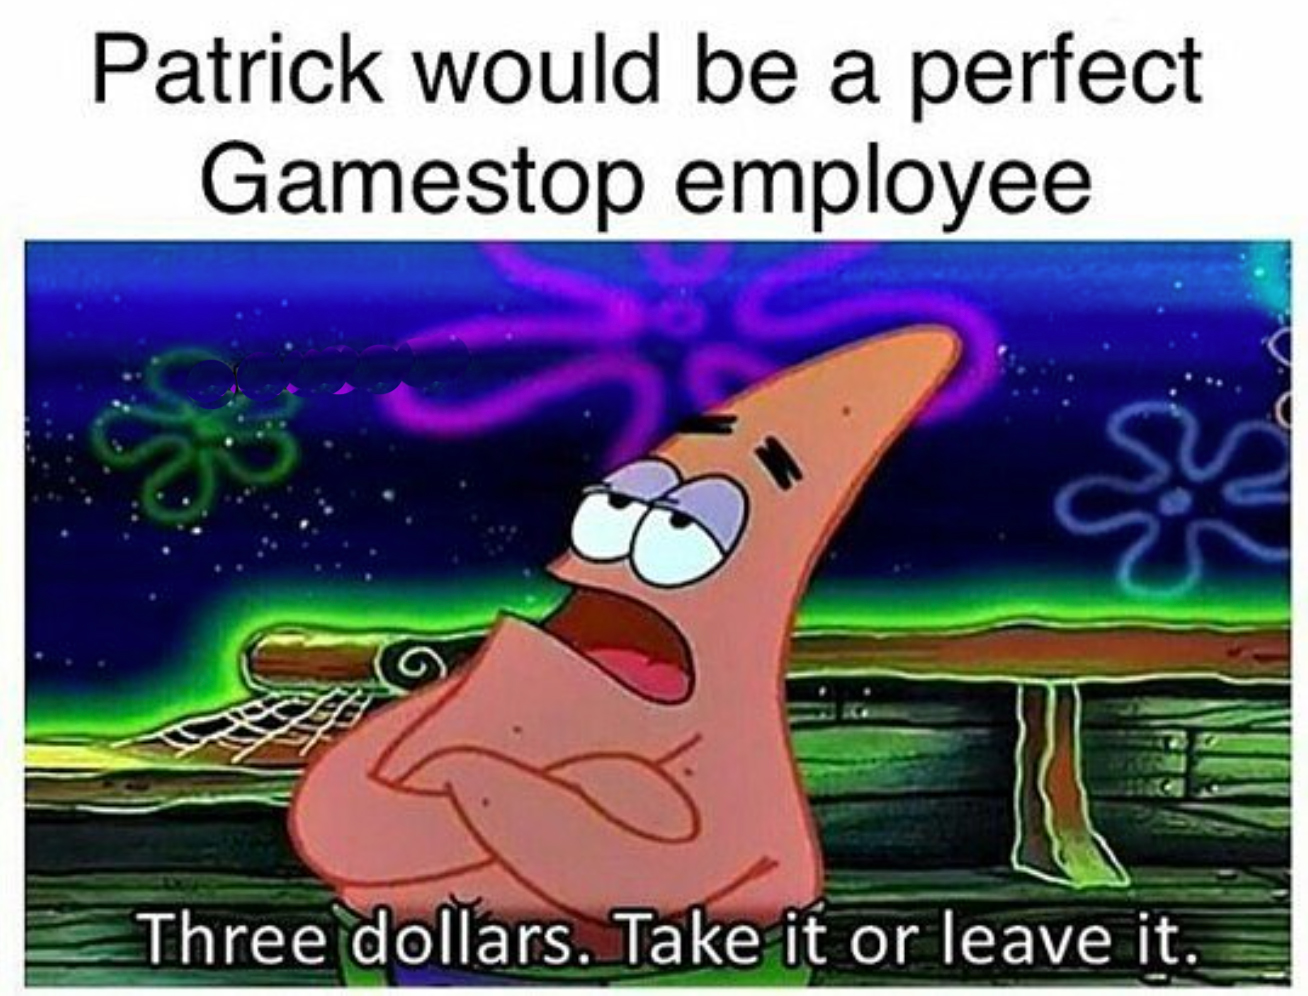 patrick would be a perfect gamestop employee. - three dollars. take it or leave it.